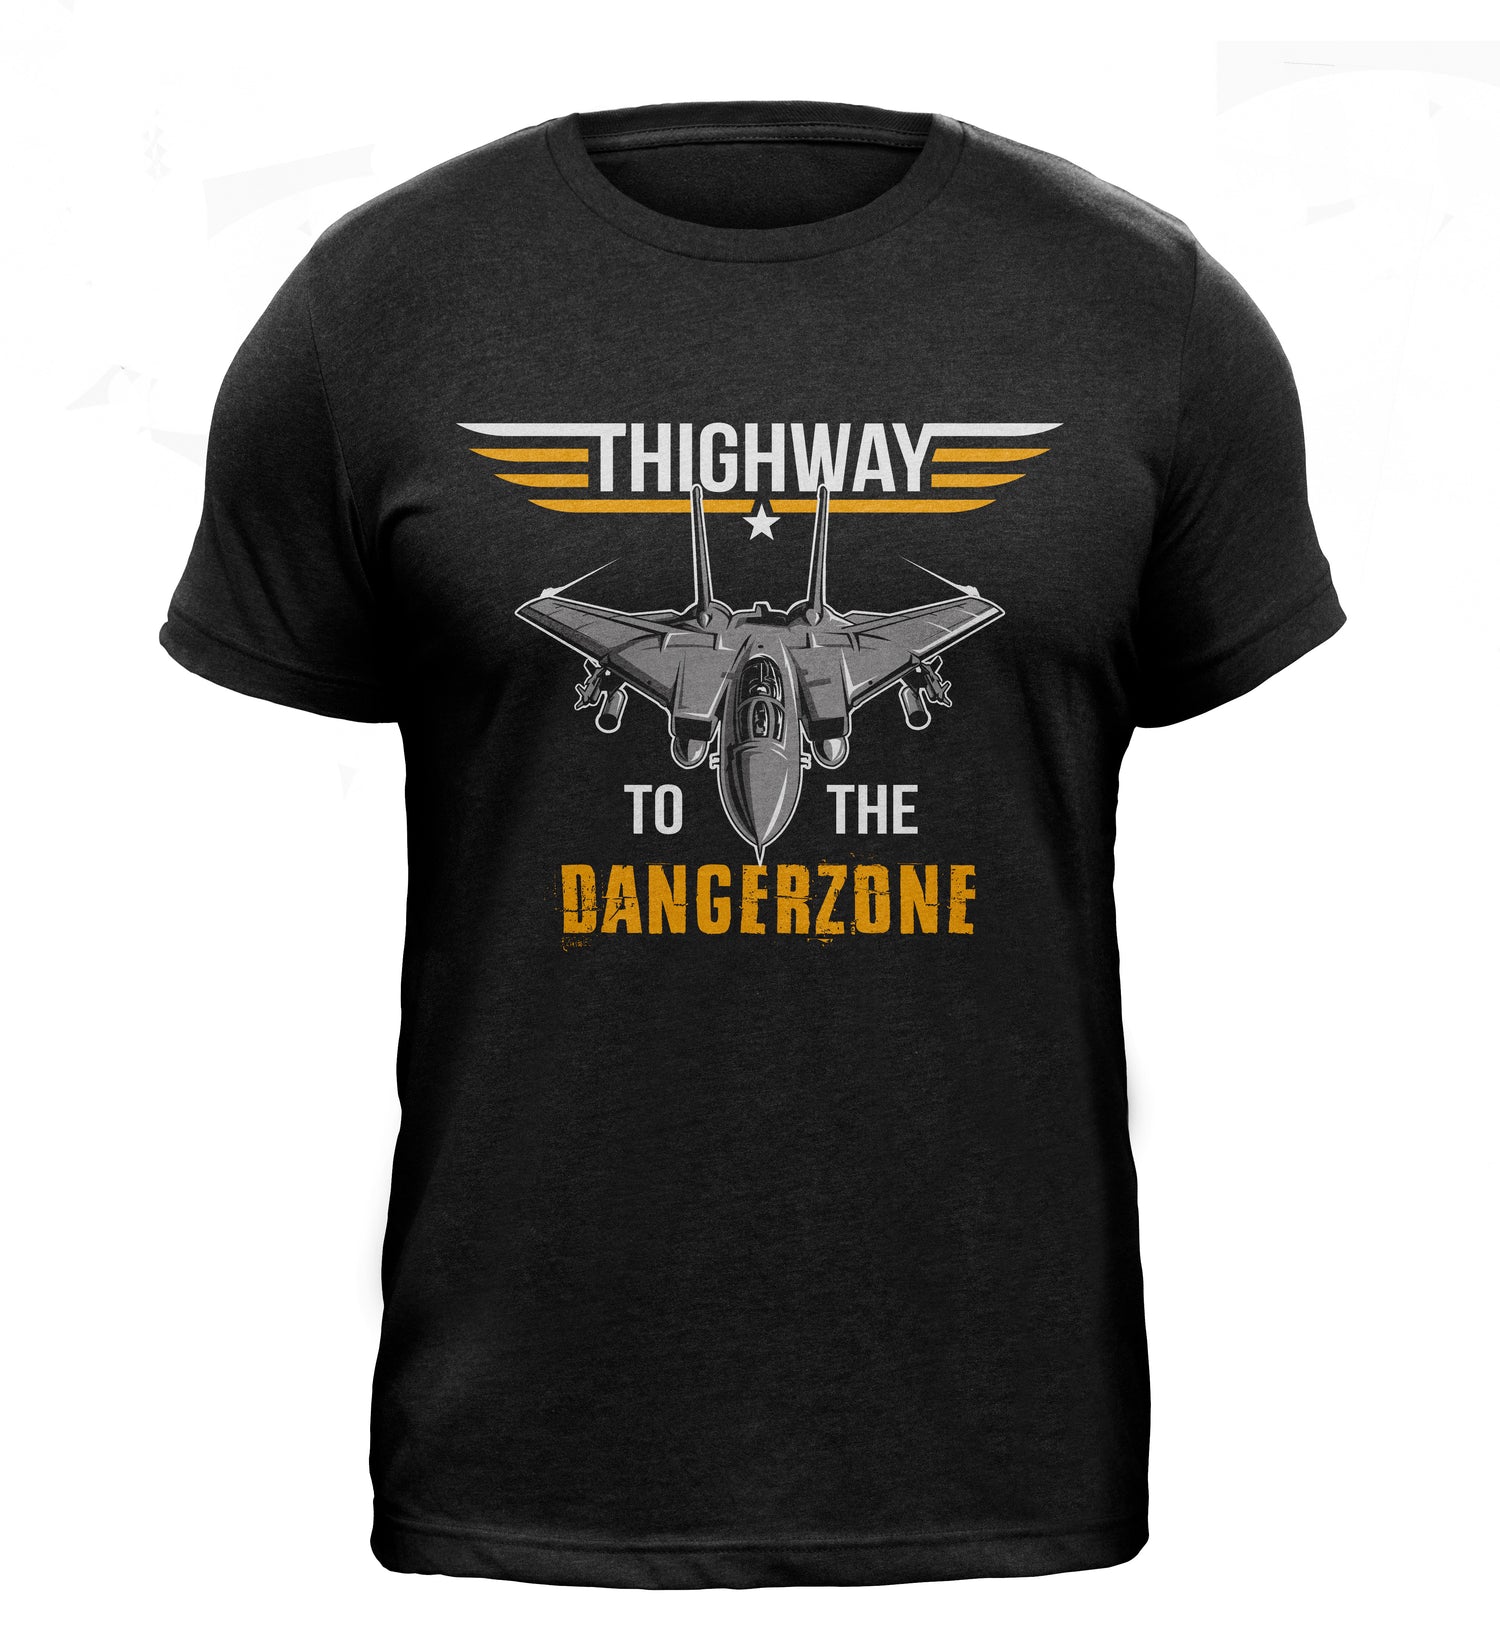 Thighway to the Danger Zone T-Shirt